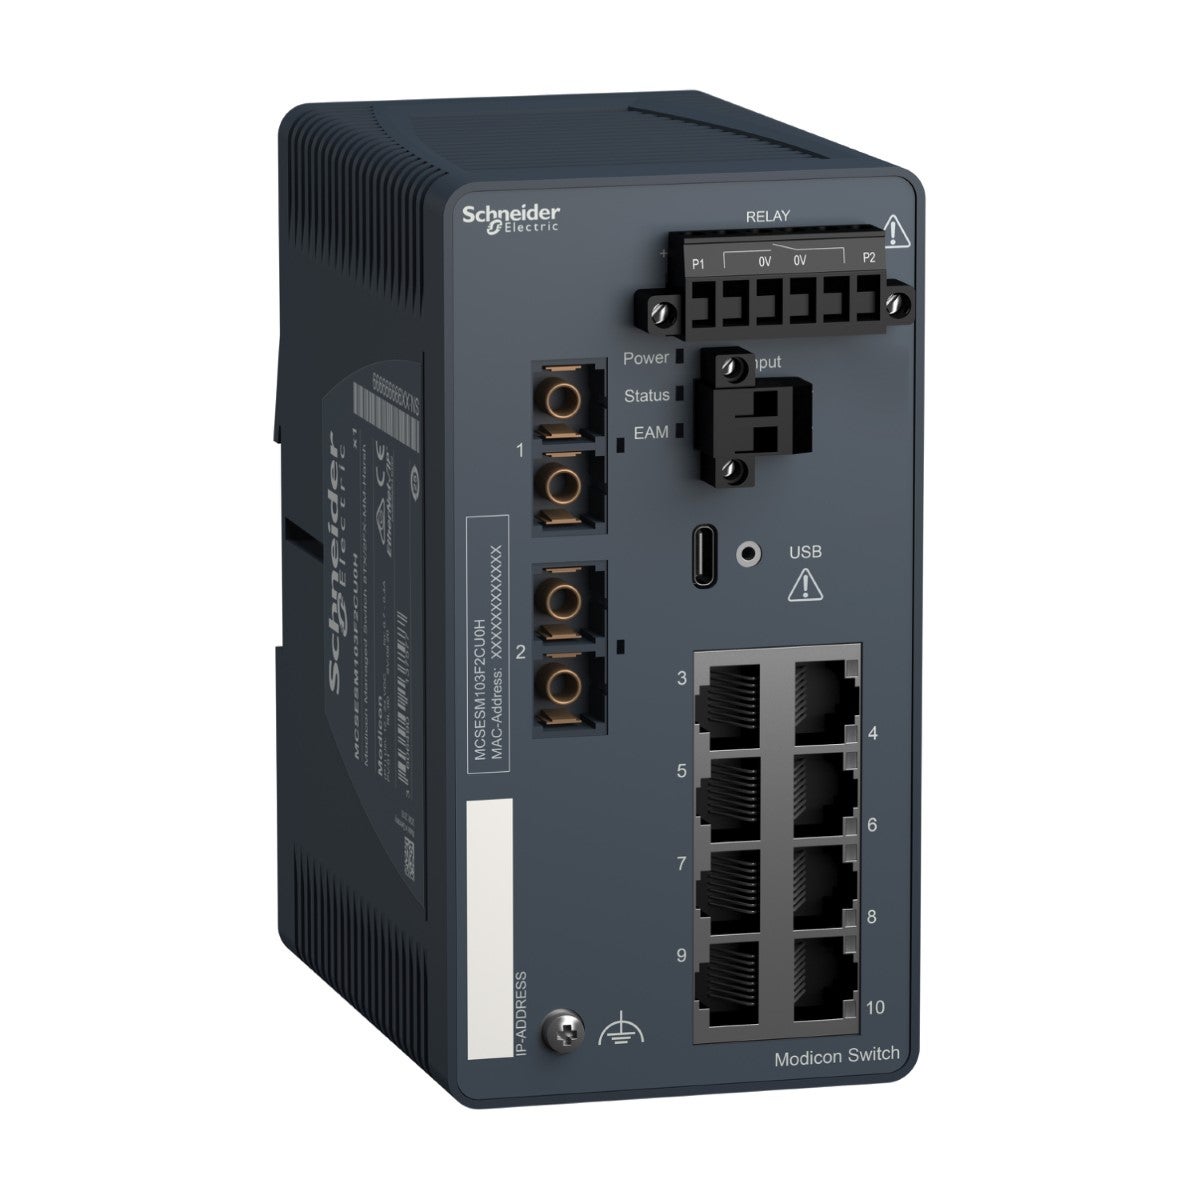 network switch, Modicon Networking, managed, 8 ports for copper with 2 ports for fiber optic, multimode, harsh